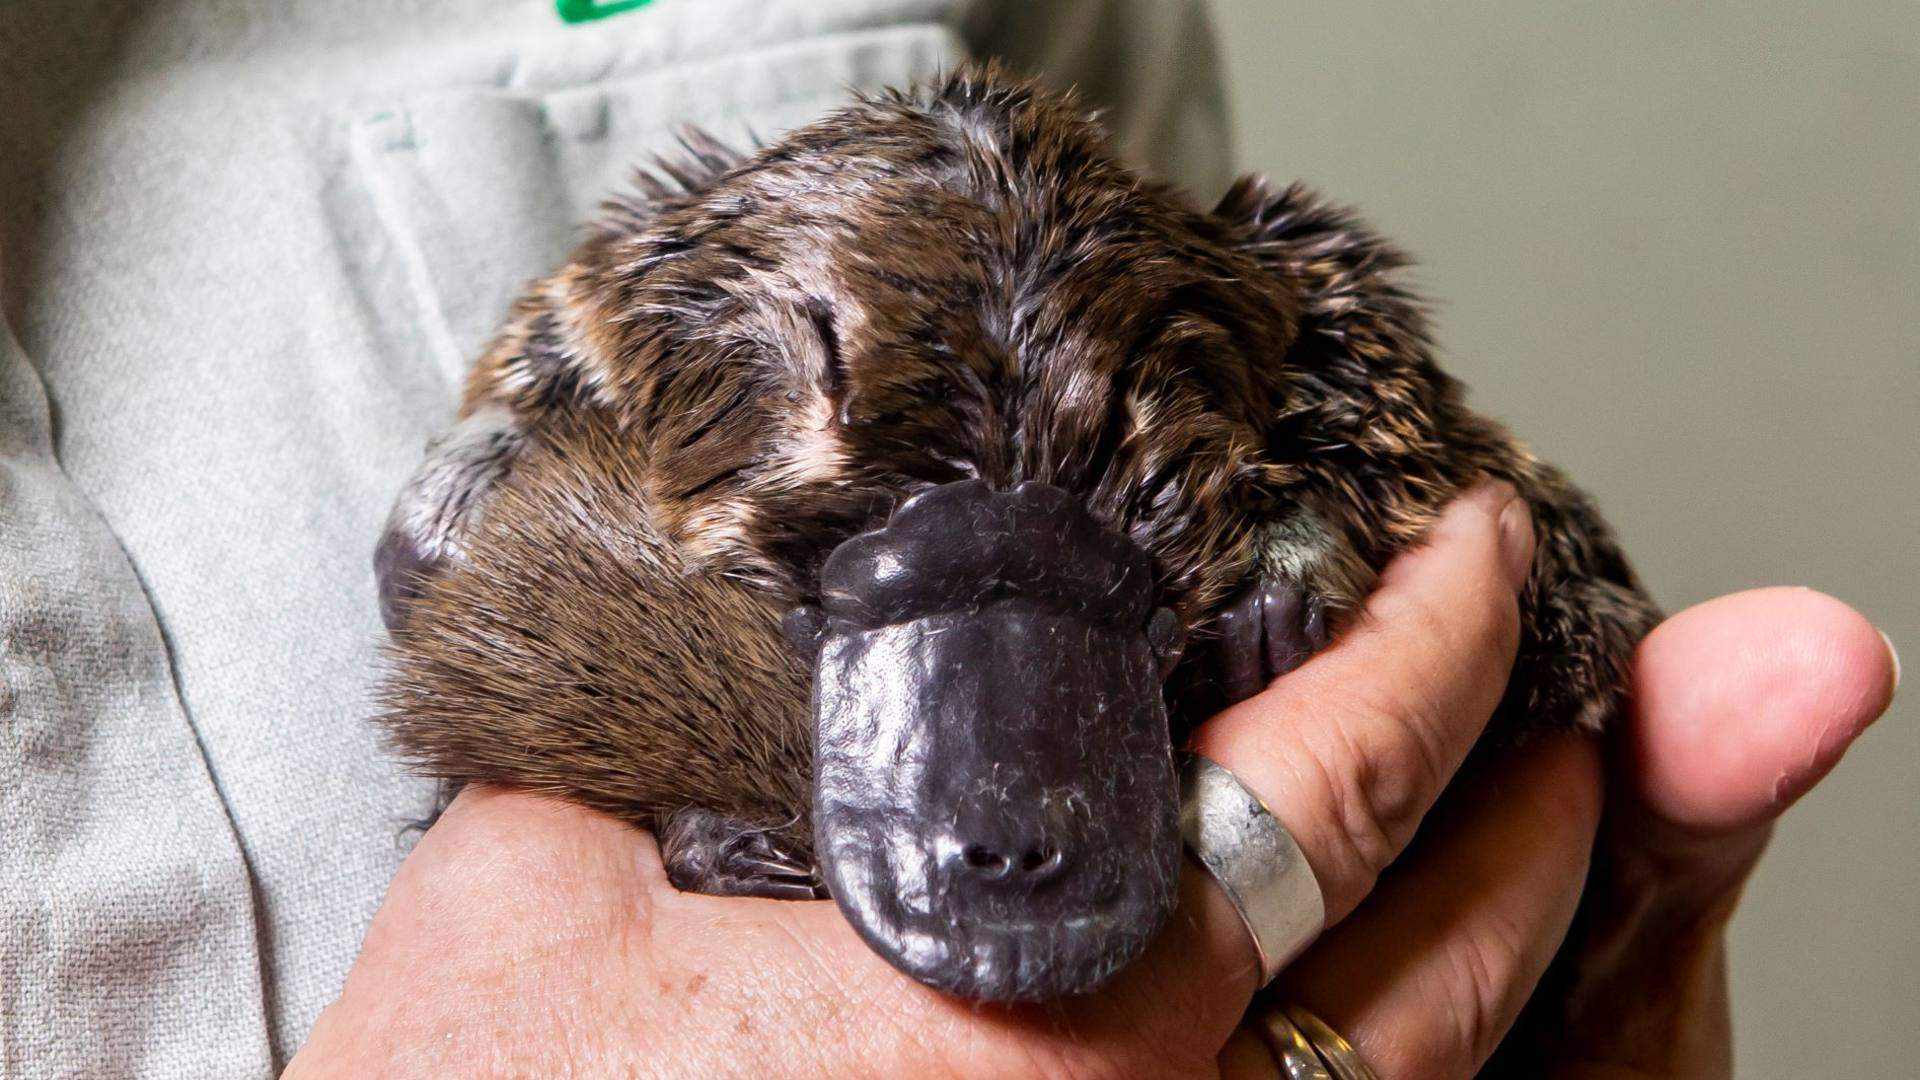 Platypuses Have Been Reintroduced to the Royal National Park for the First Time in 50 Years